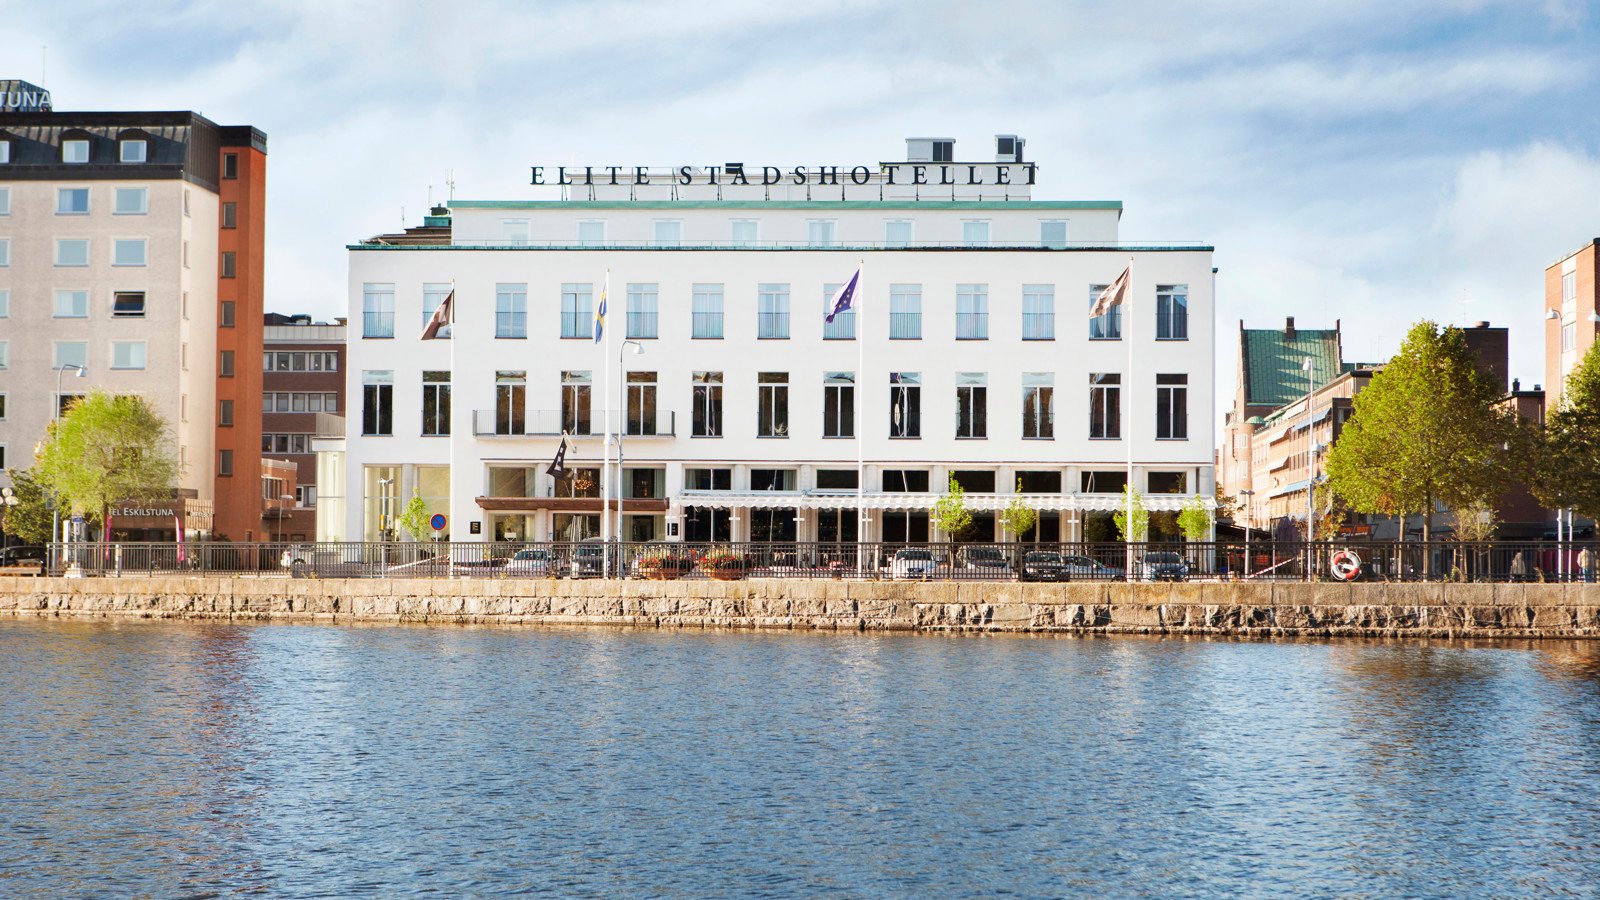 The grand facade of the Elite Stadshotellet with the Eskilstuna River in front